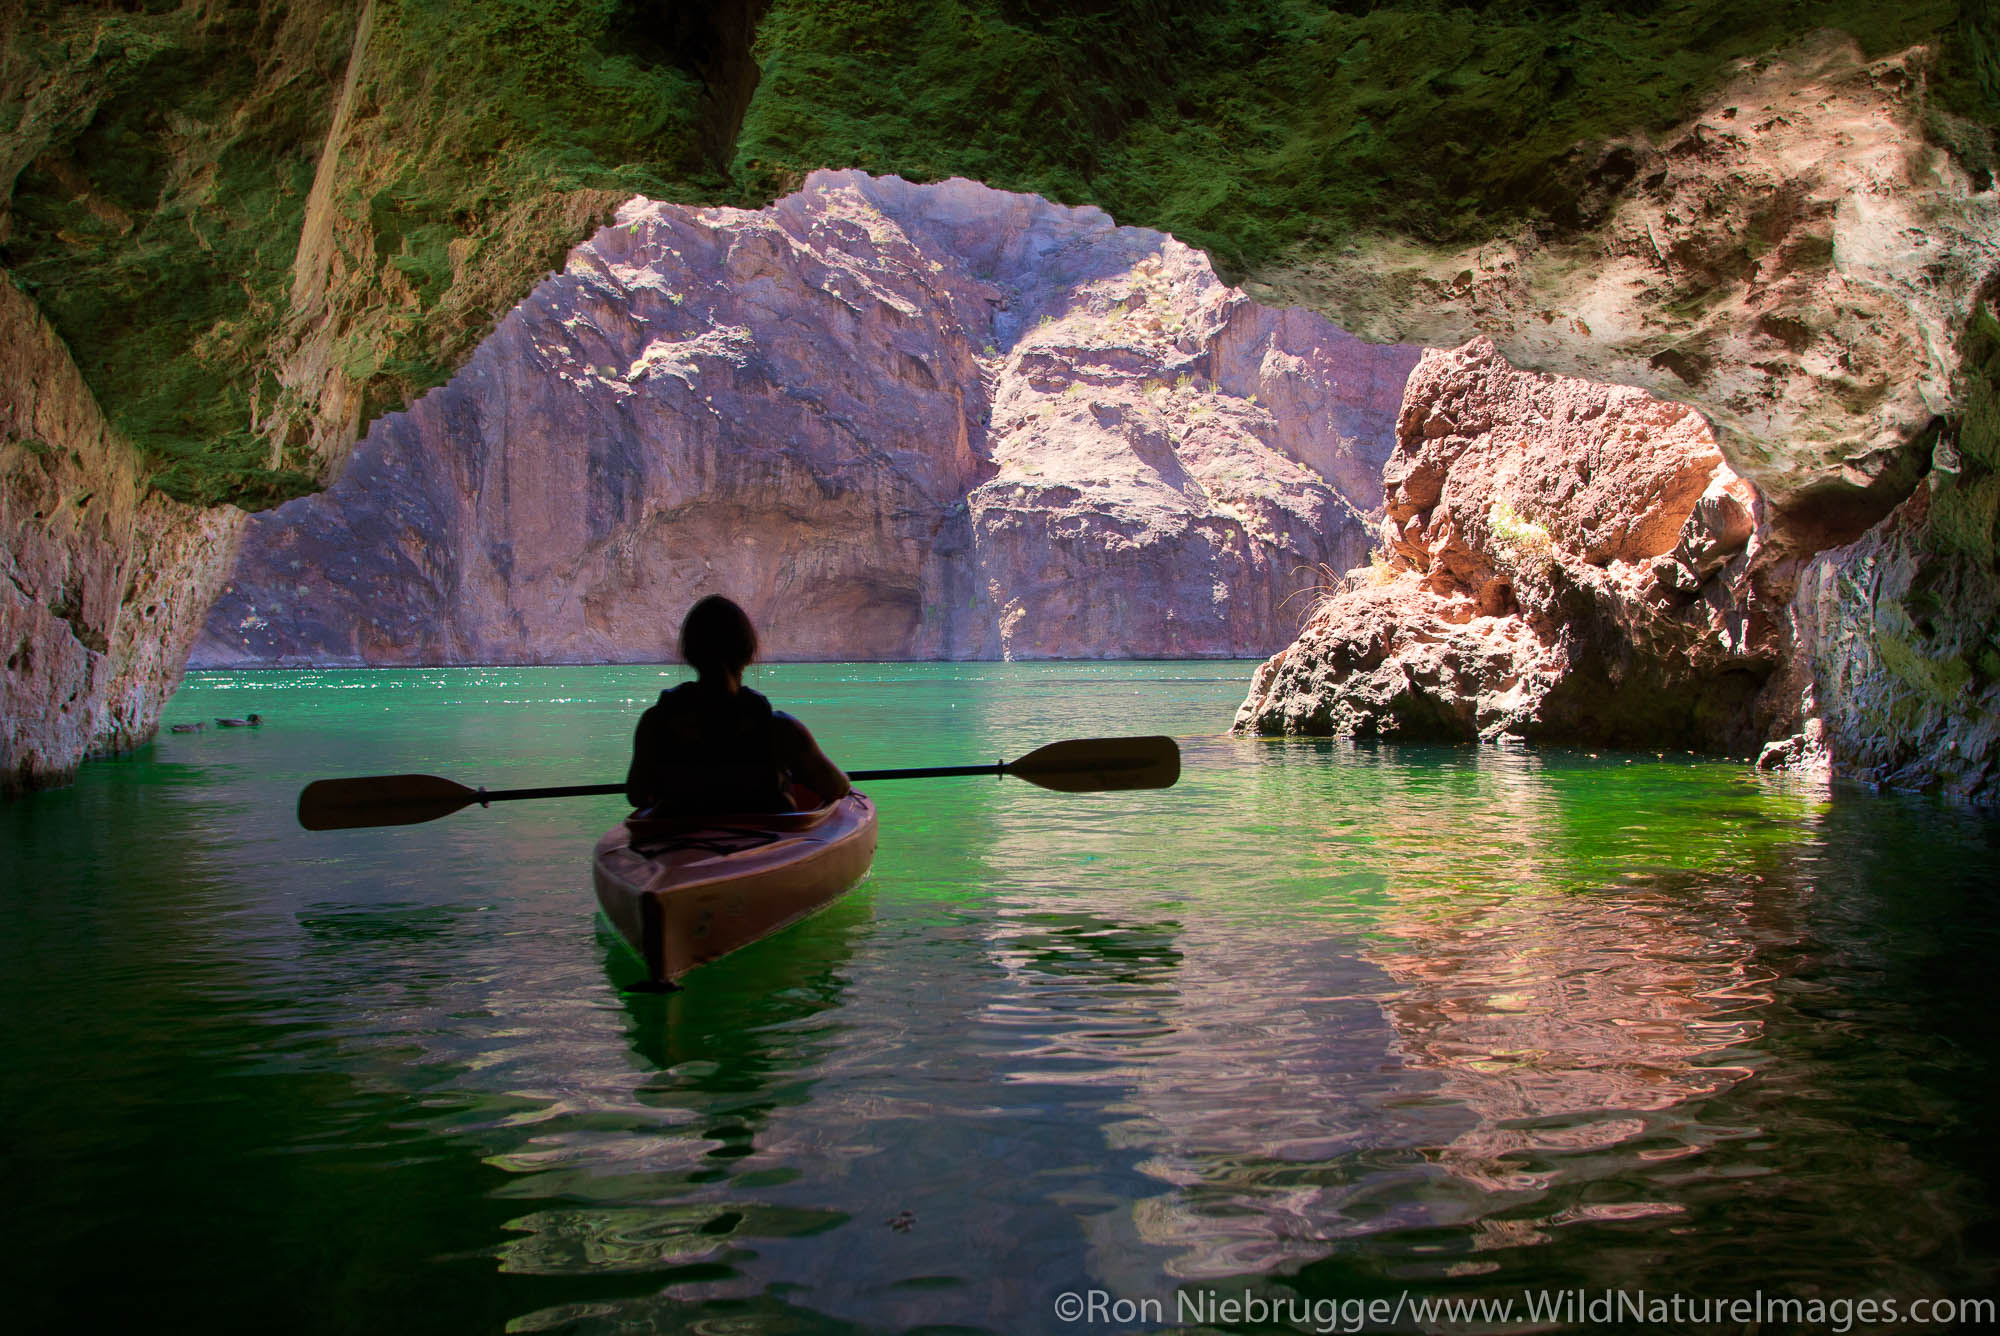 Kayaking on the Colorado River, Lake Mead National Recreation Area, near Las Vegas, Nevada.  (model released)